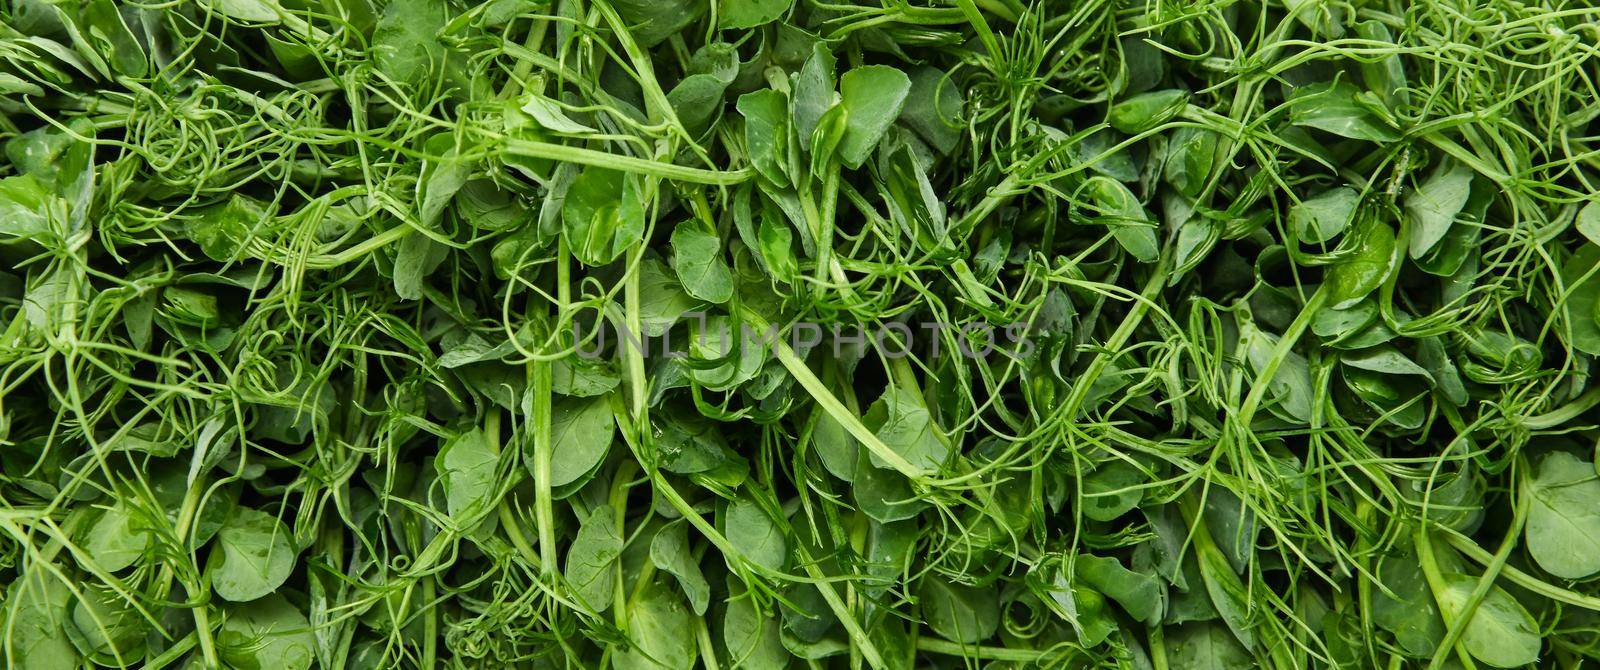 Close up fresh green peas microgreen sprouts background, elevated top view, directly above